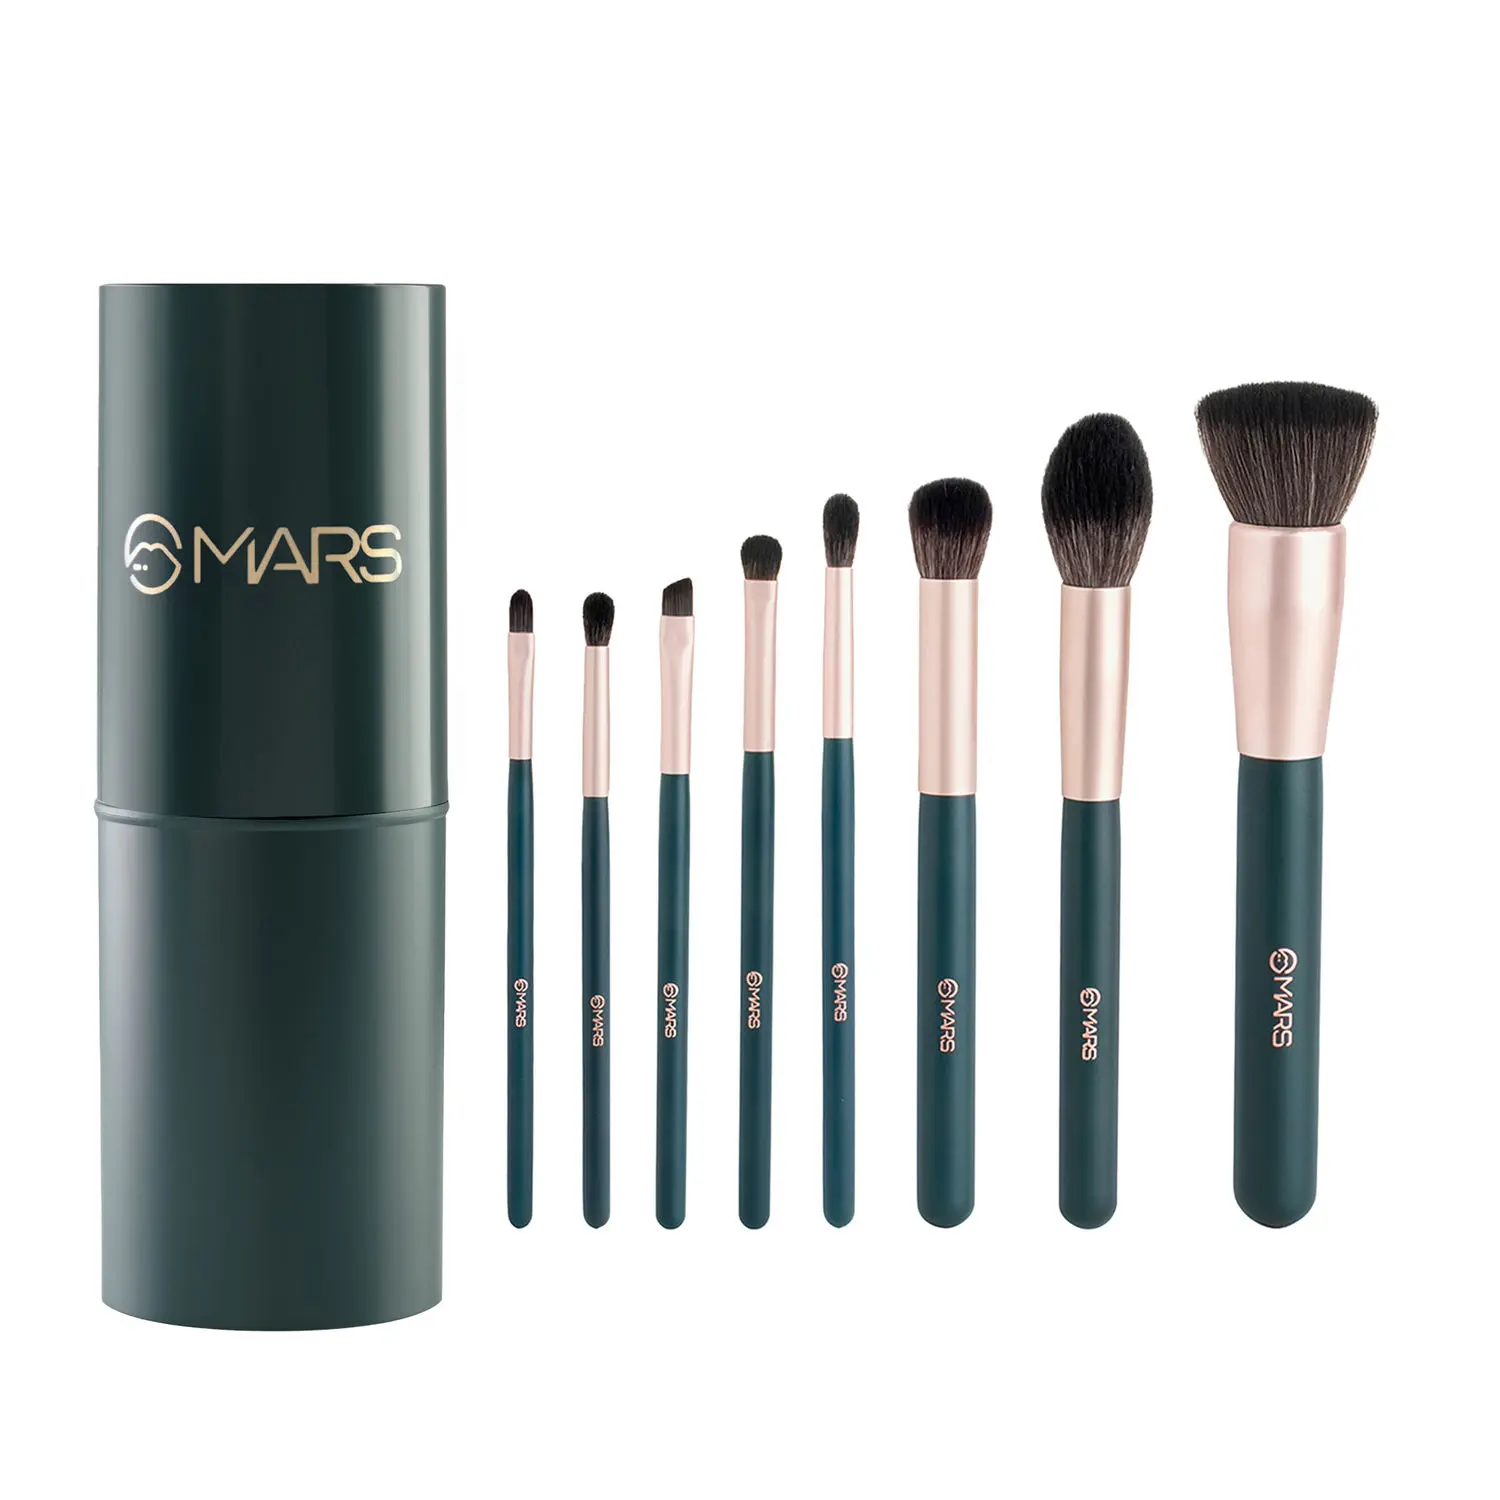 MARS Tools of Titans Brush Set of 8 ultra soft brushes with Holder